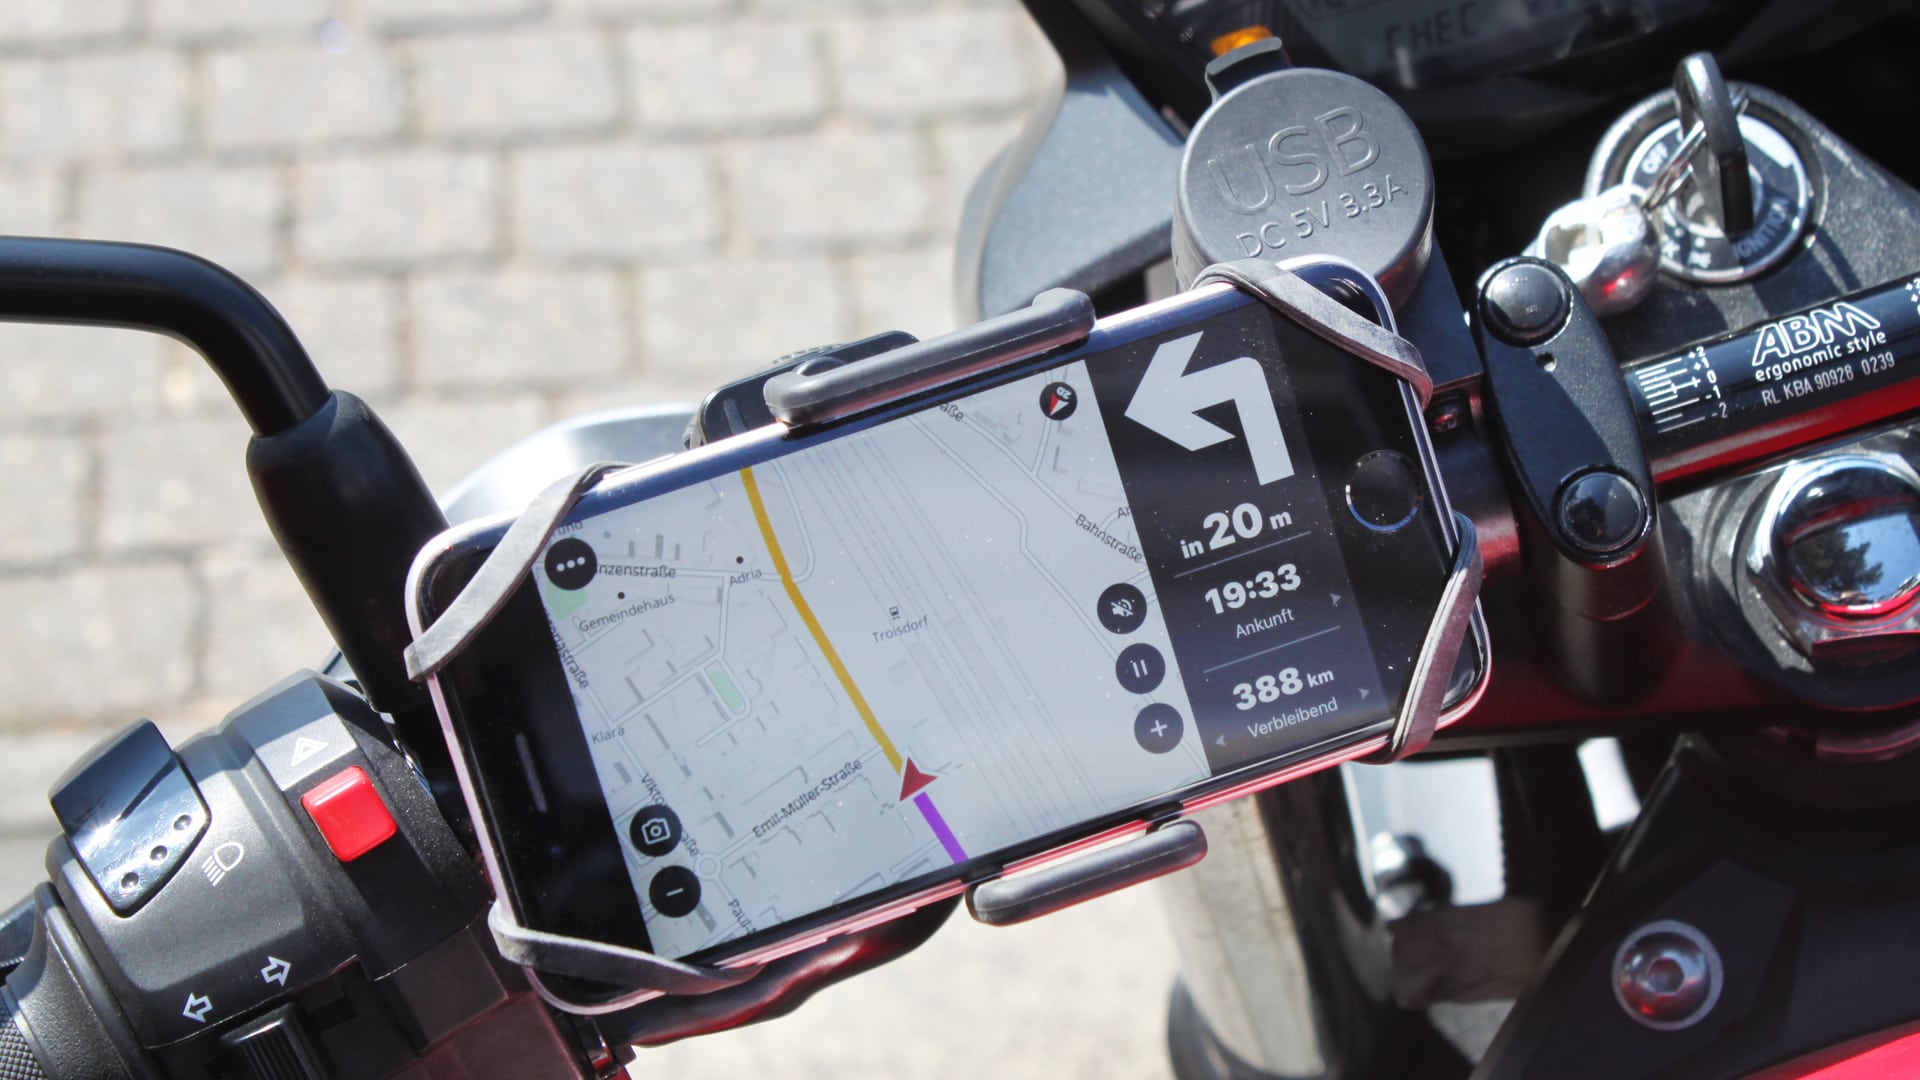 The screen of the Calimoto navigation system can be mounted with just a few hand movements.